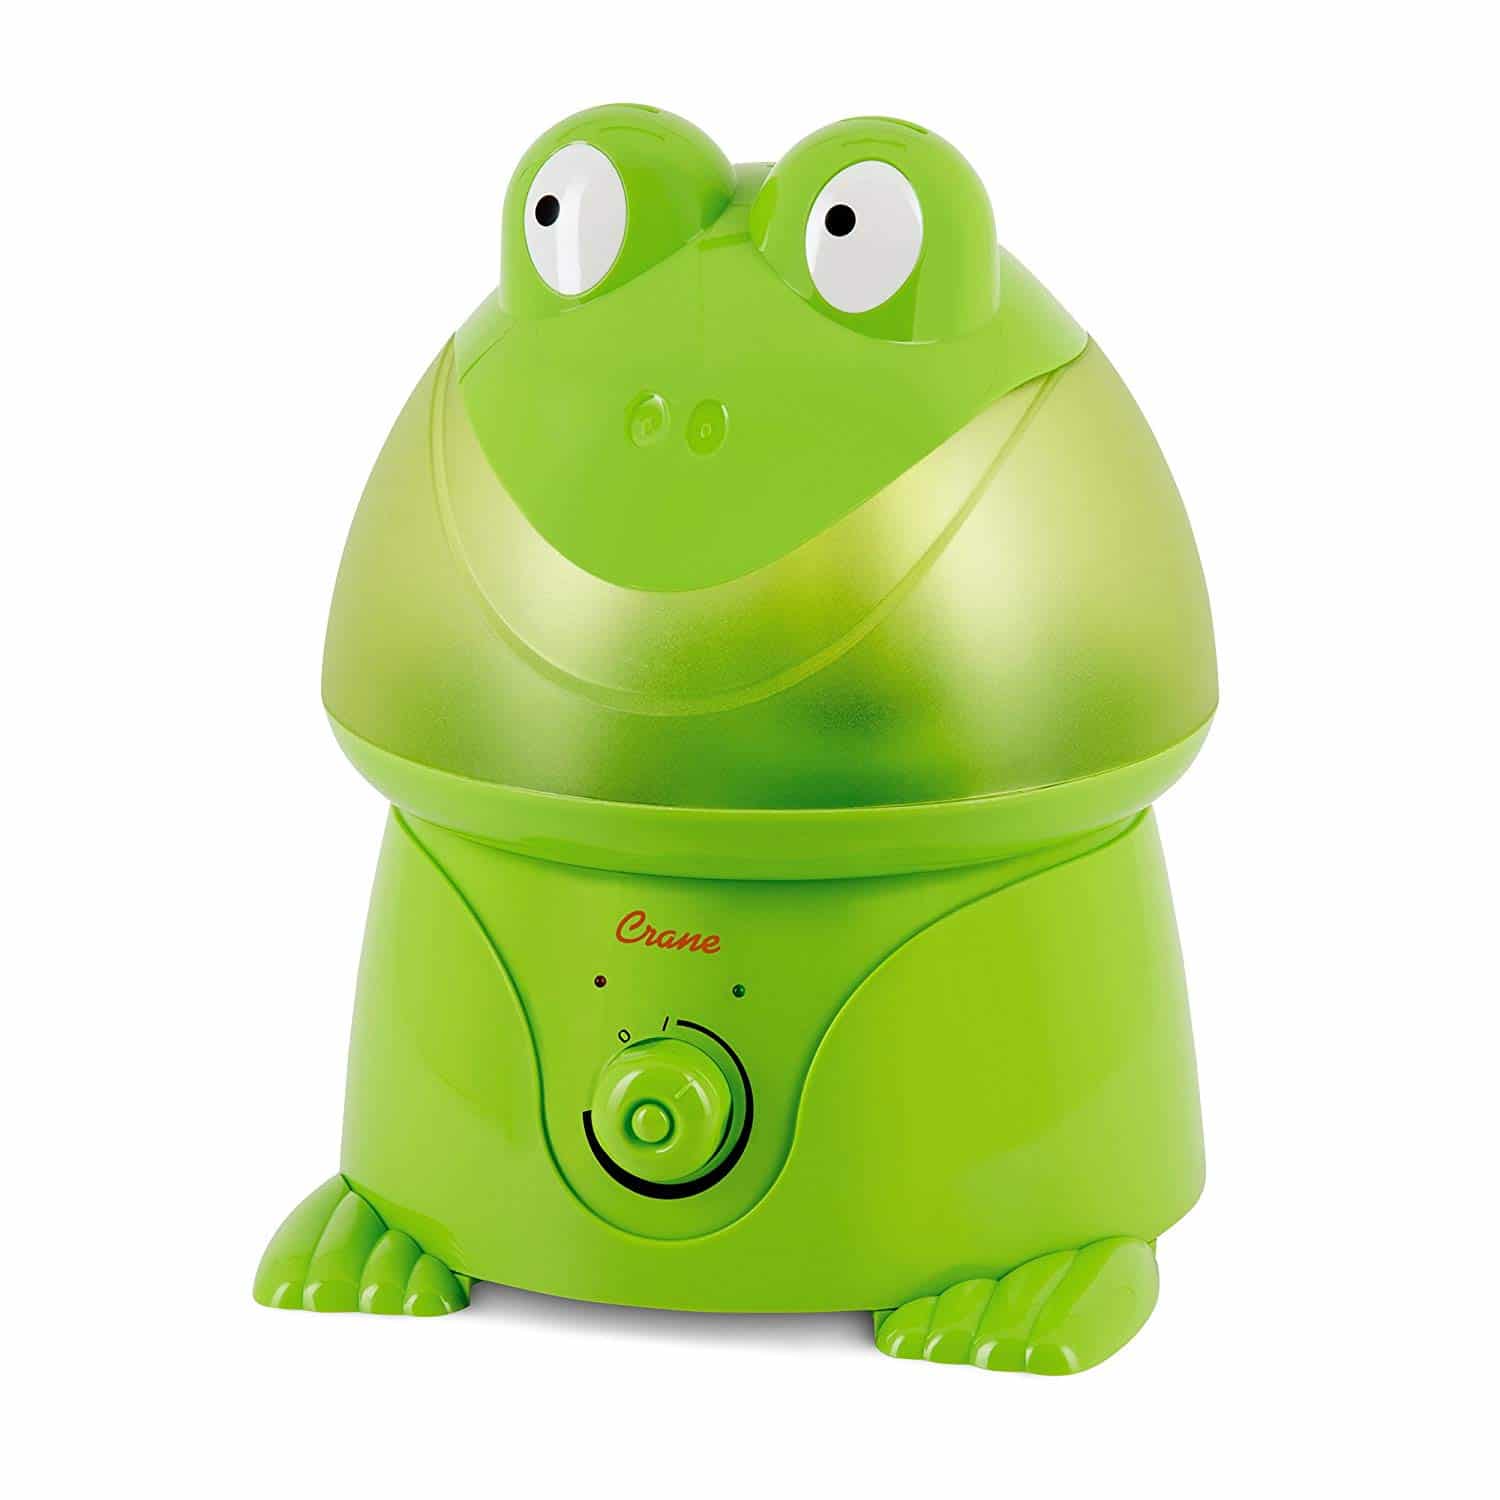 Crane Filter-Free Cool Mist Humidifier for Kids